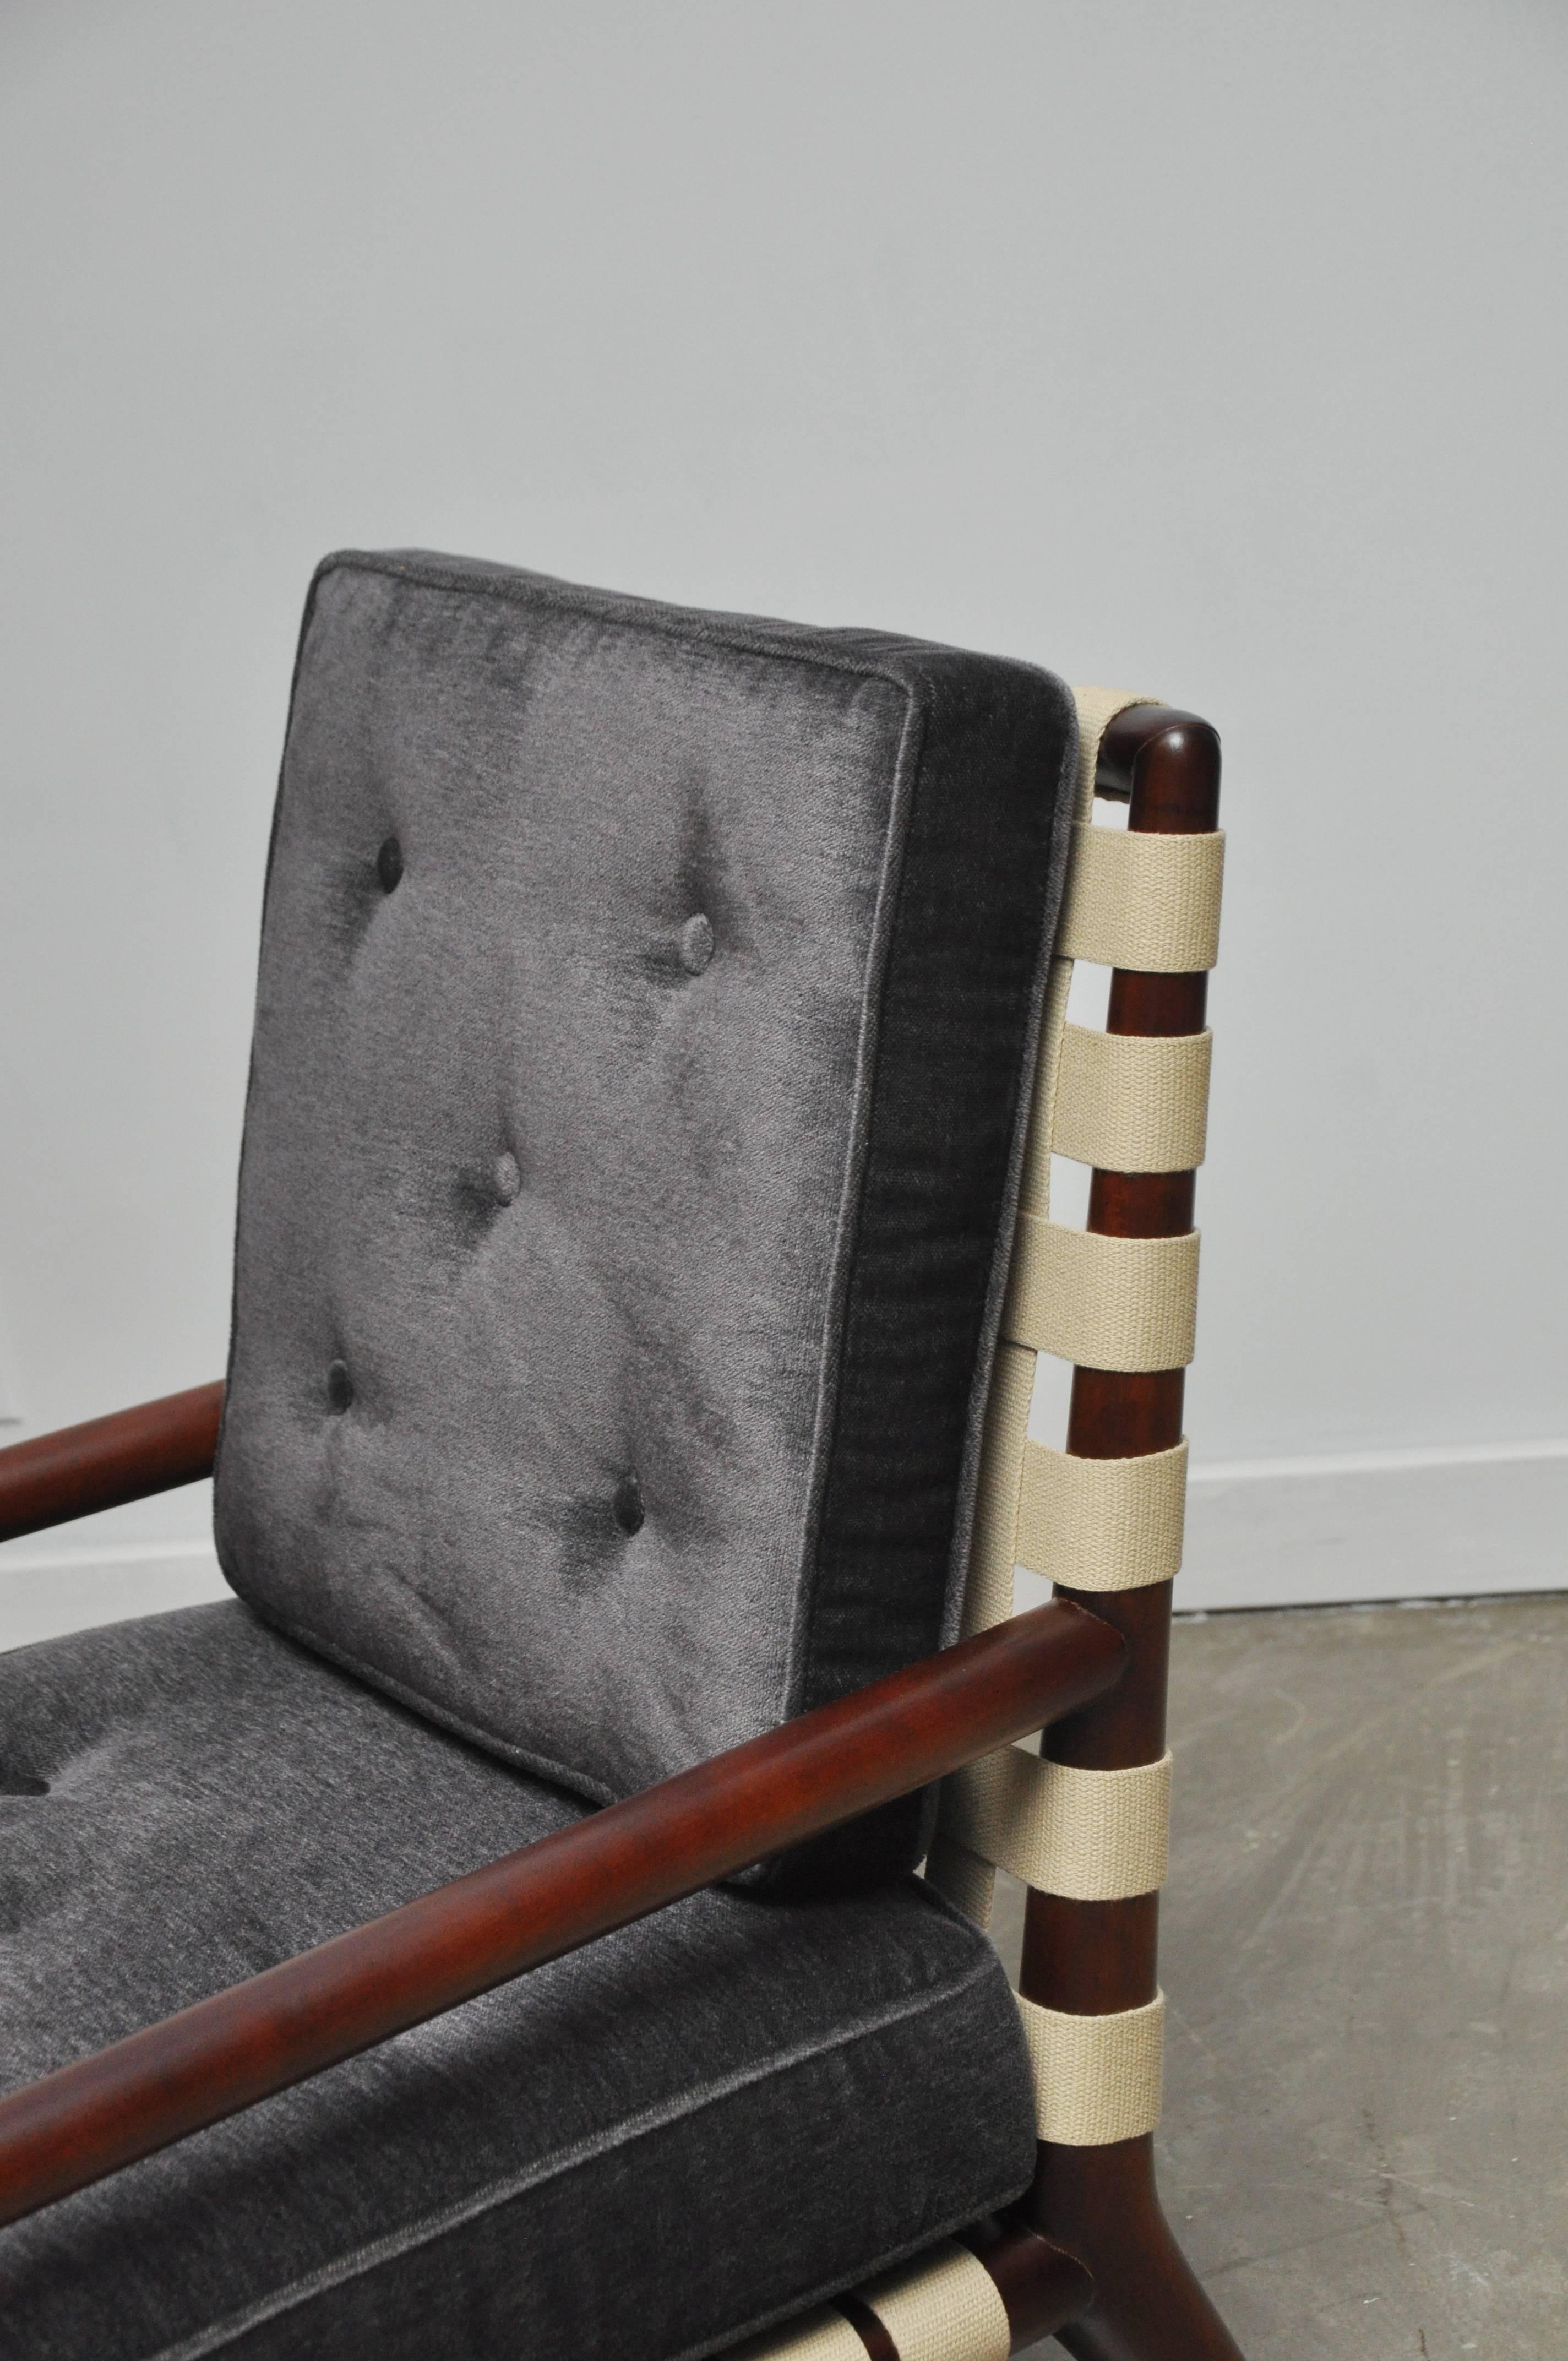 Strap frame lounge chairs by T.H. Robsjohn-Gibbings. Coveted strap frames with new charcoal mohair cushions. Chairs have been fully restored. Classic and beautiful Gibbings design.